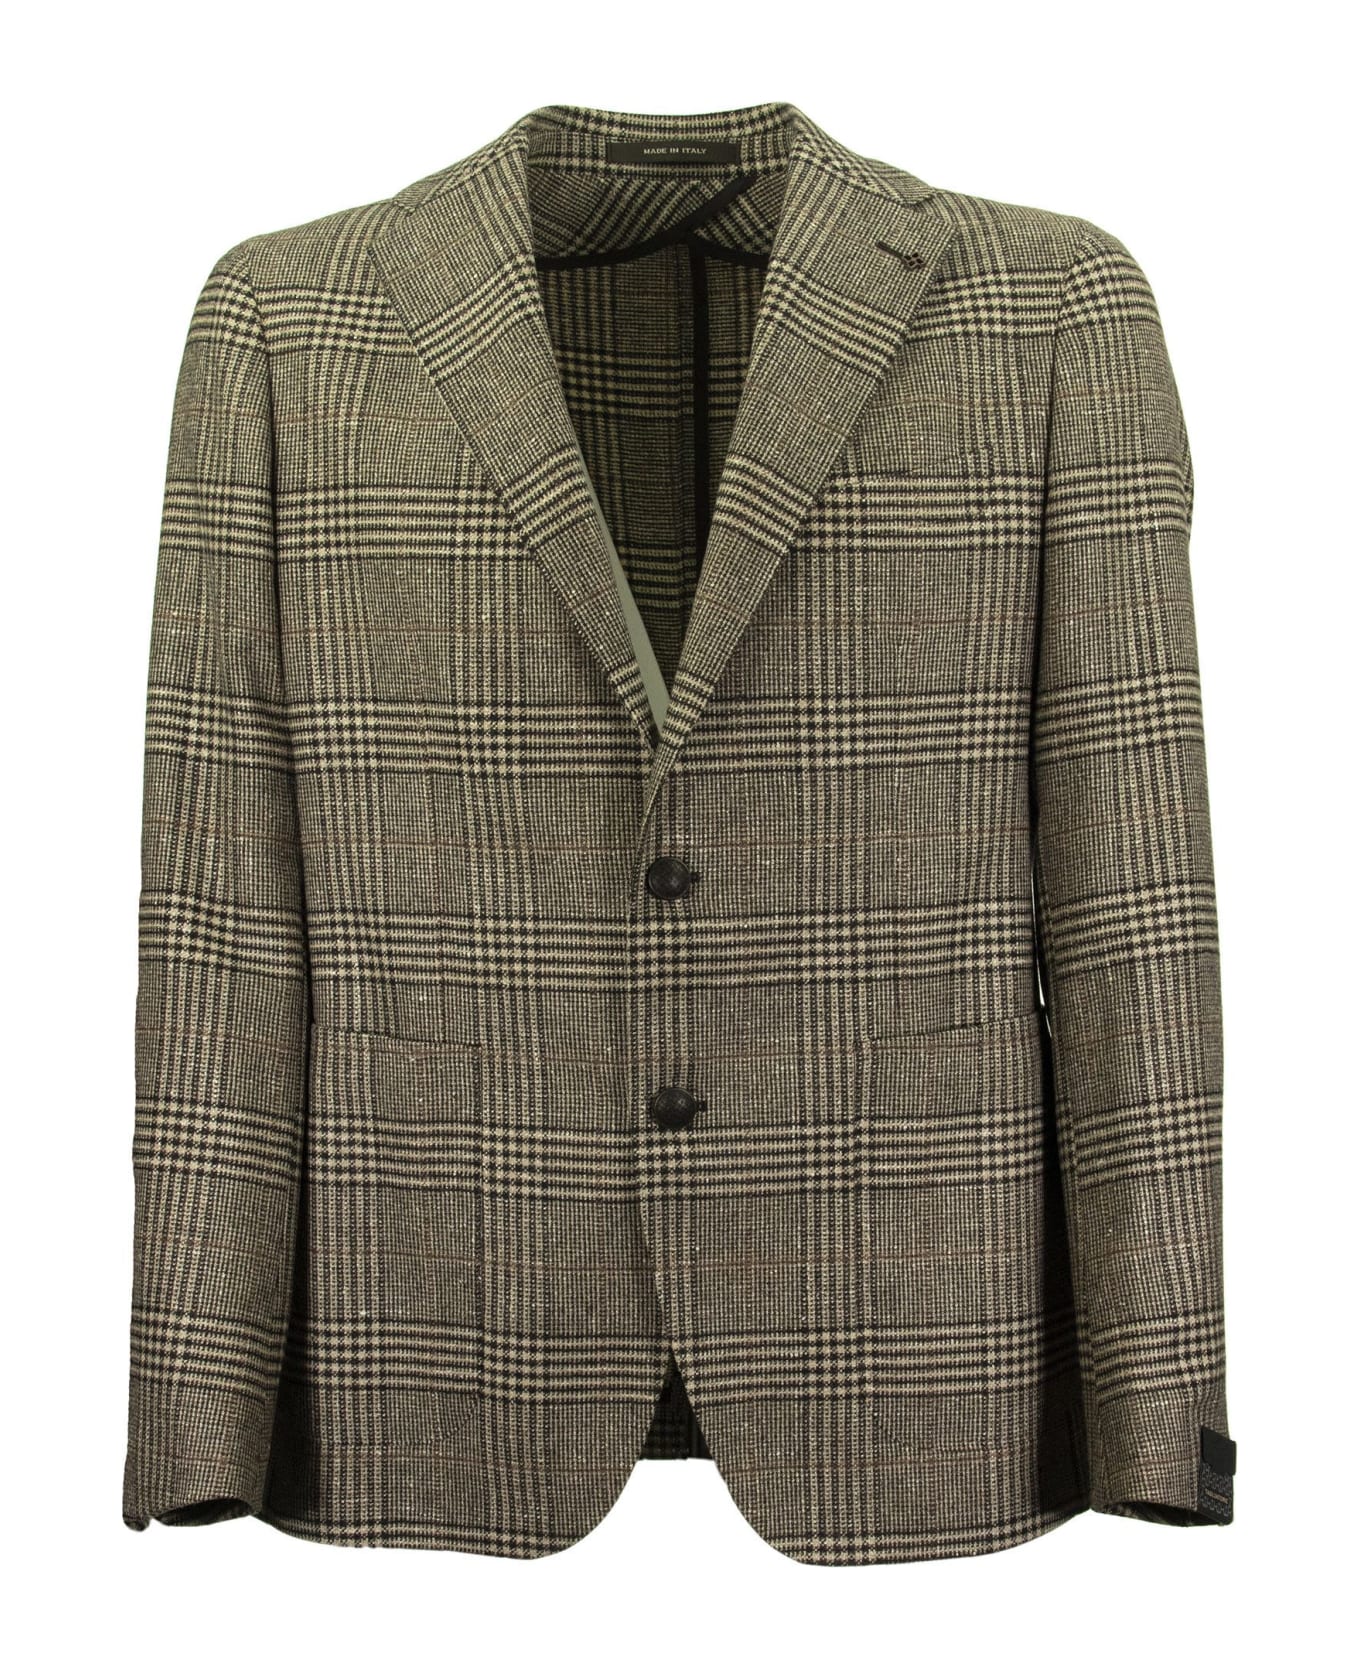 Tagliatore Prince Of Wales Jacket In Wool, Silk And Cashmere - Brown/beige スーツ